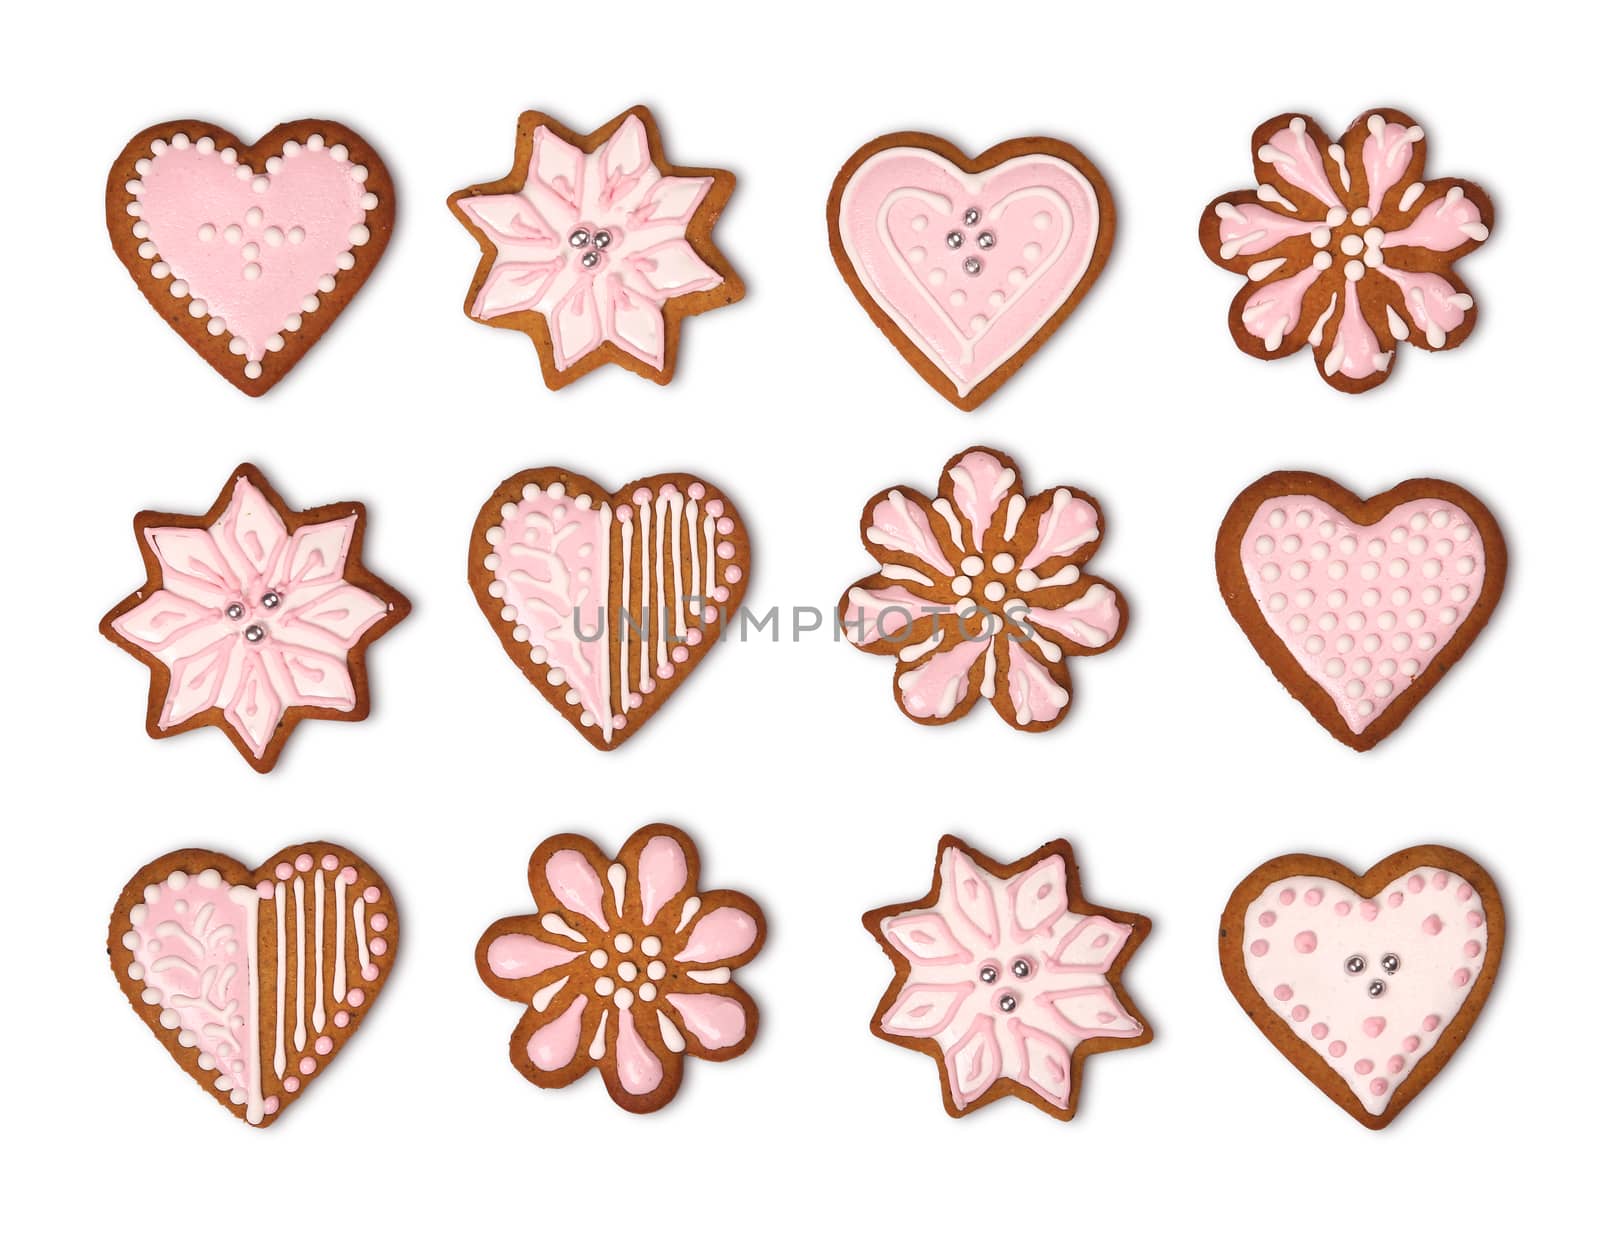 Christmas gingerbread cookies icing collection isolated on white